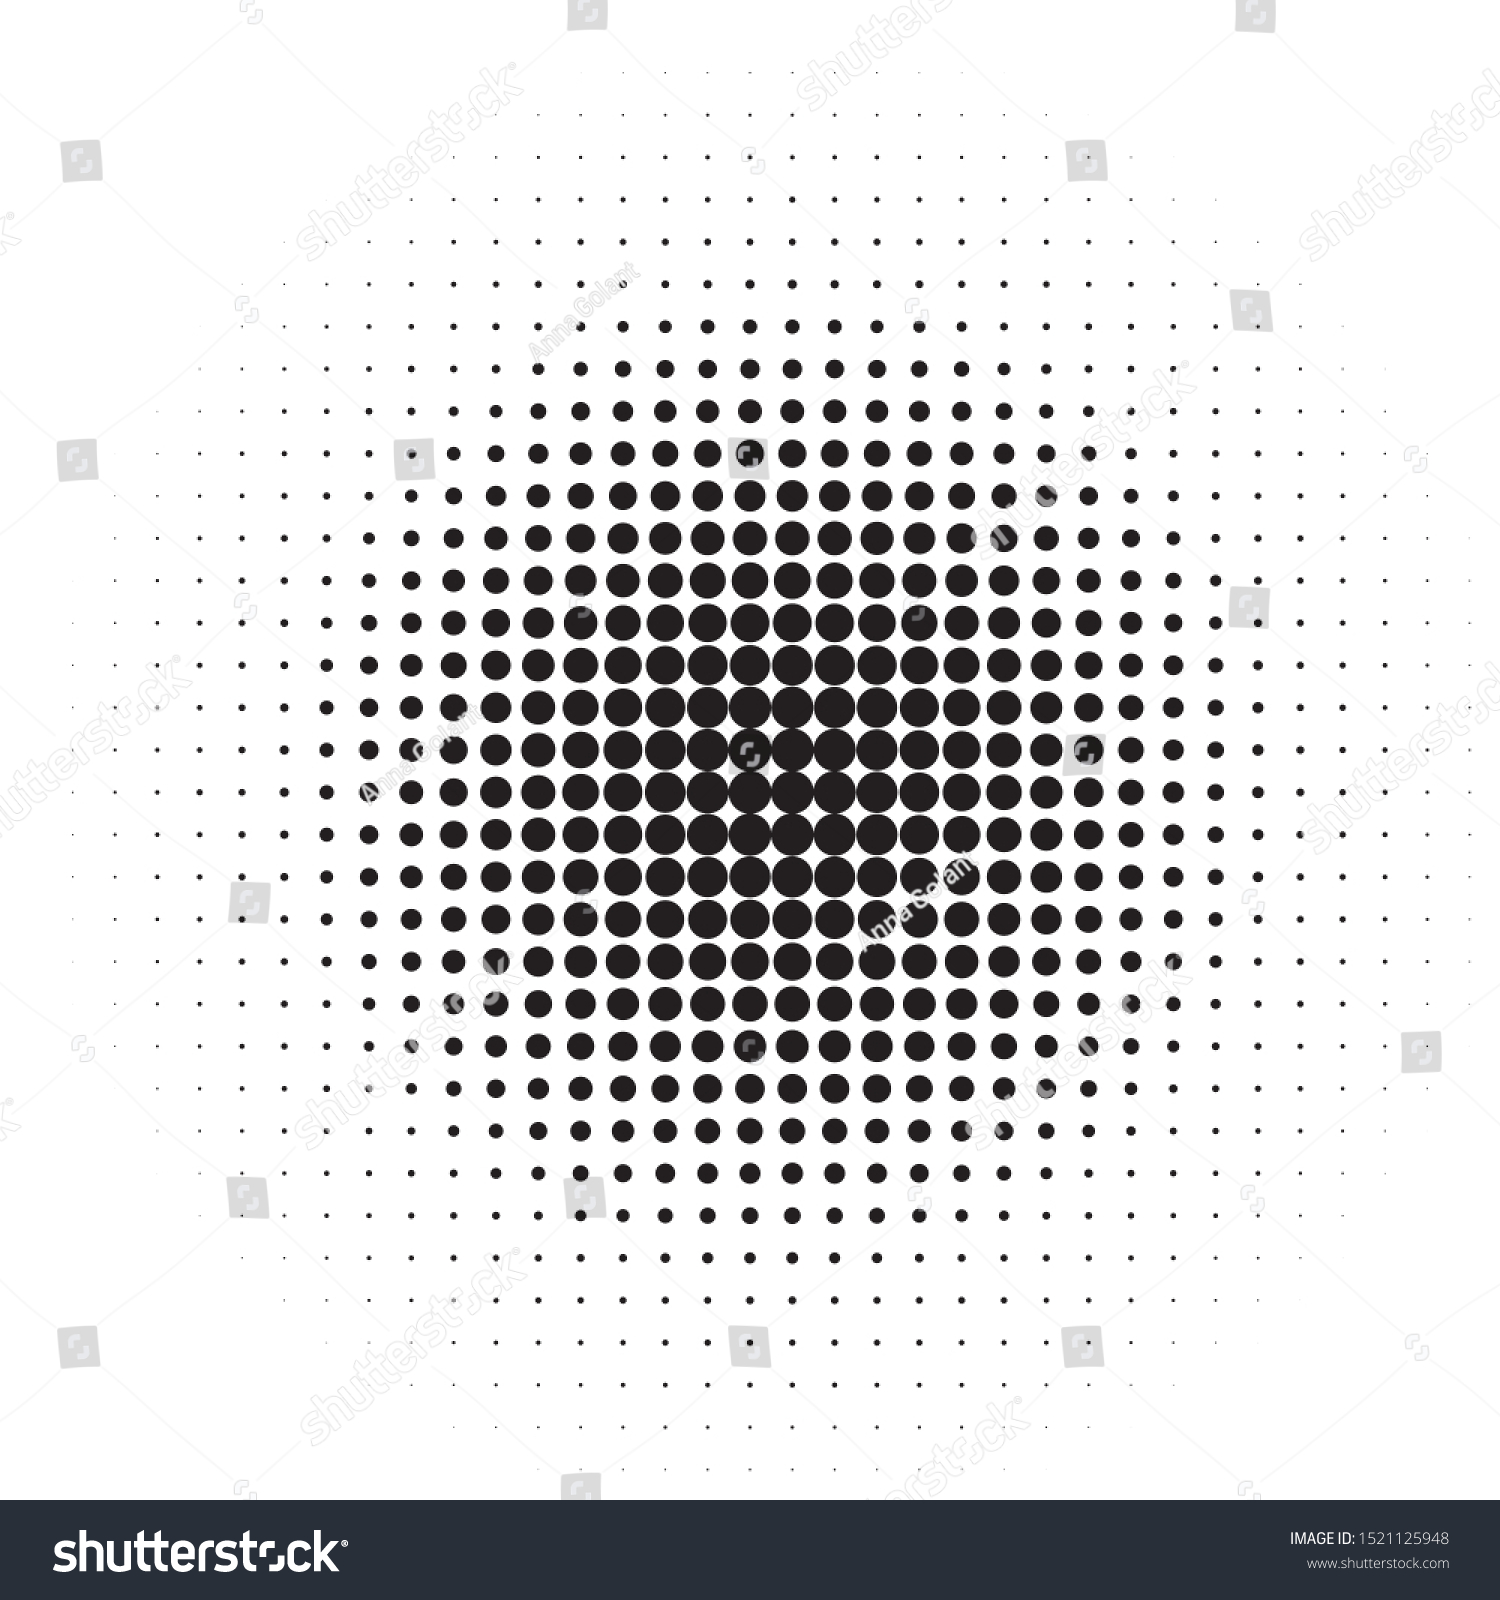 Halftone Background Comic Dotted Pattern Pop Stock Vector Royalty Free Shutterstock